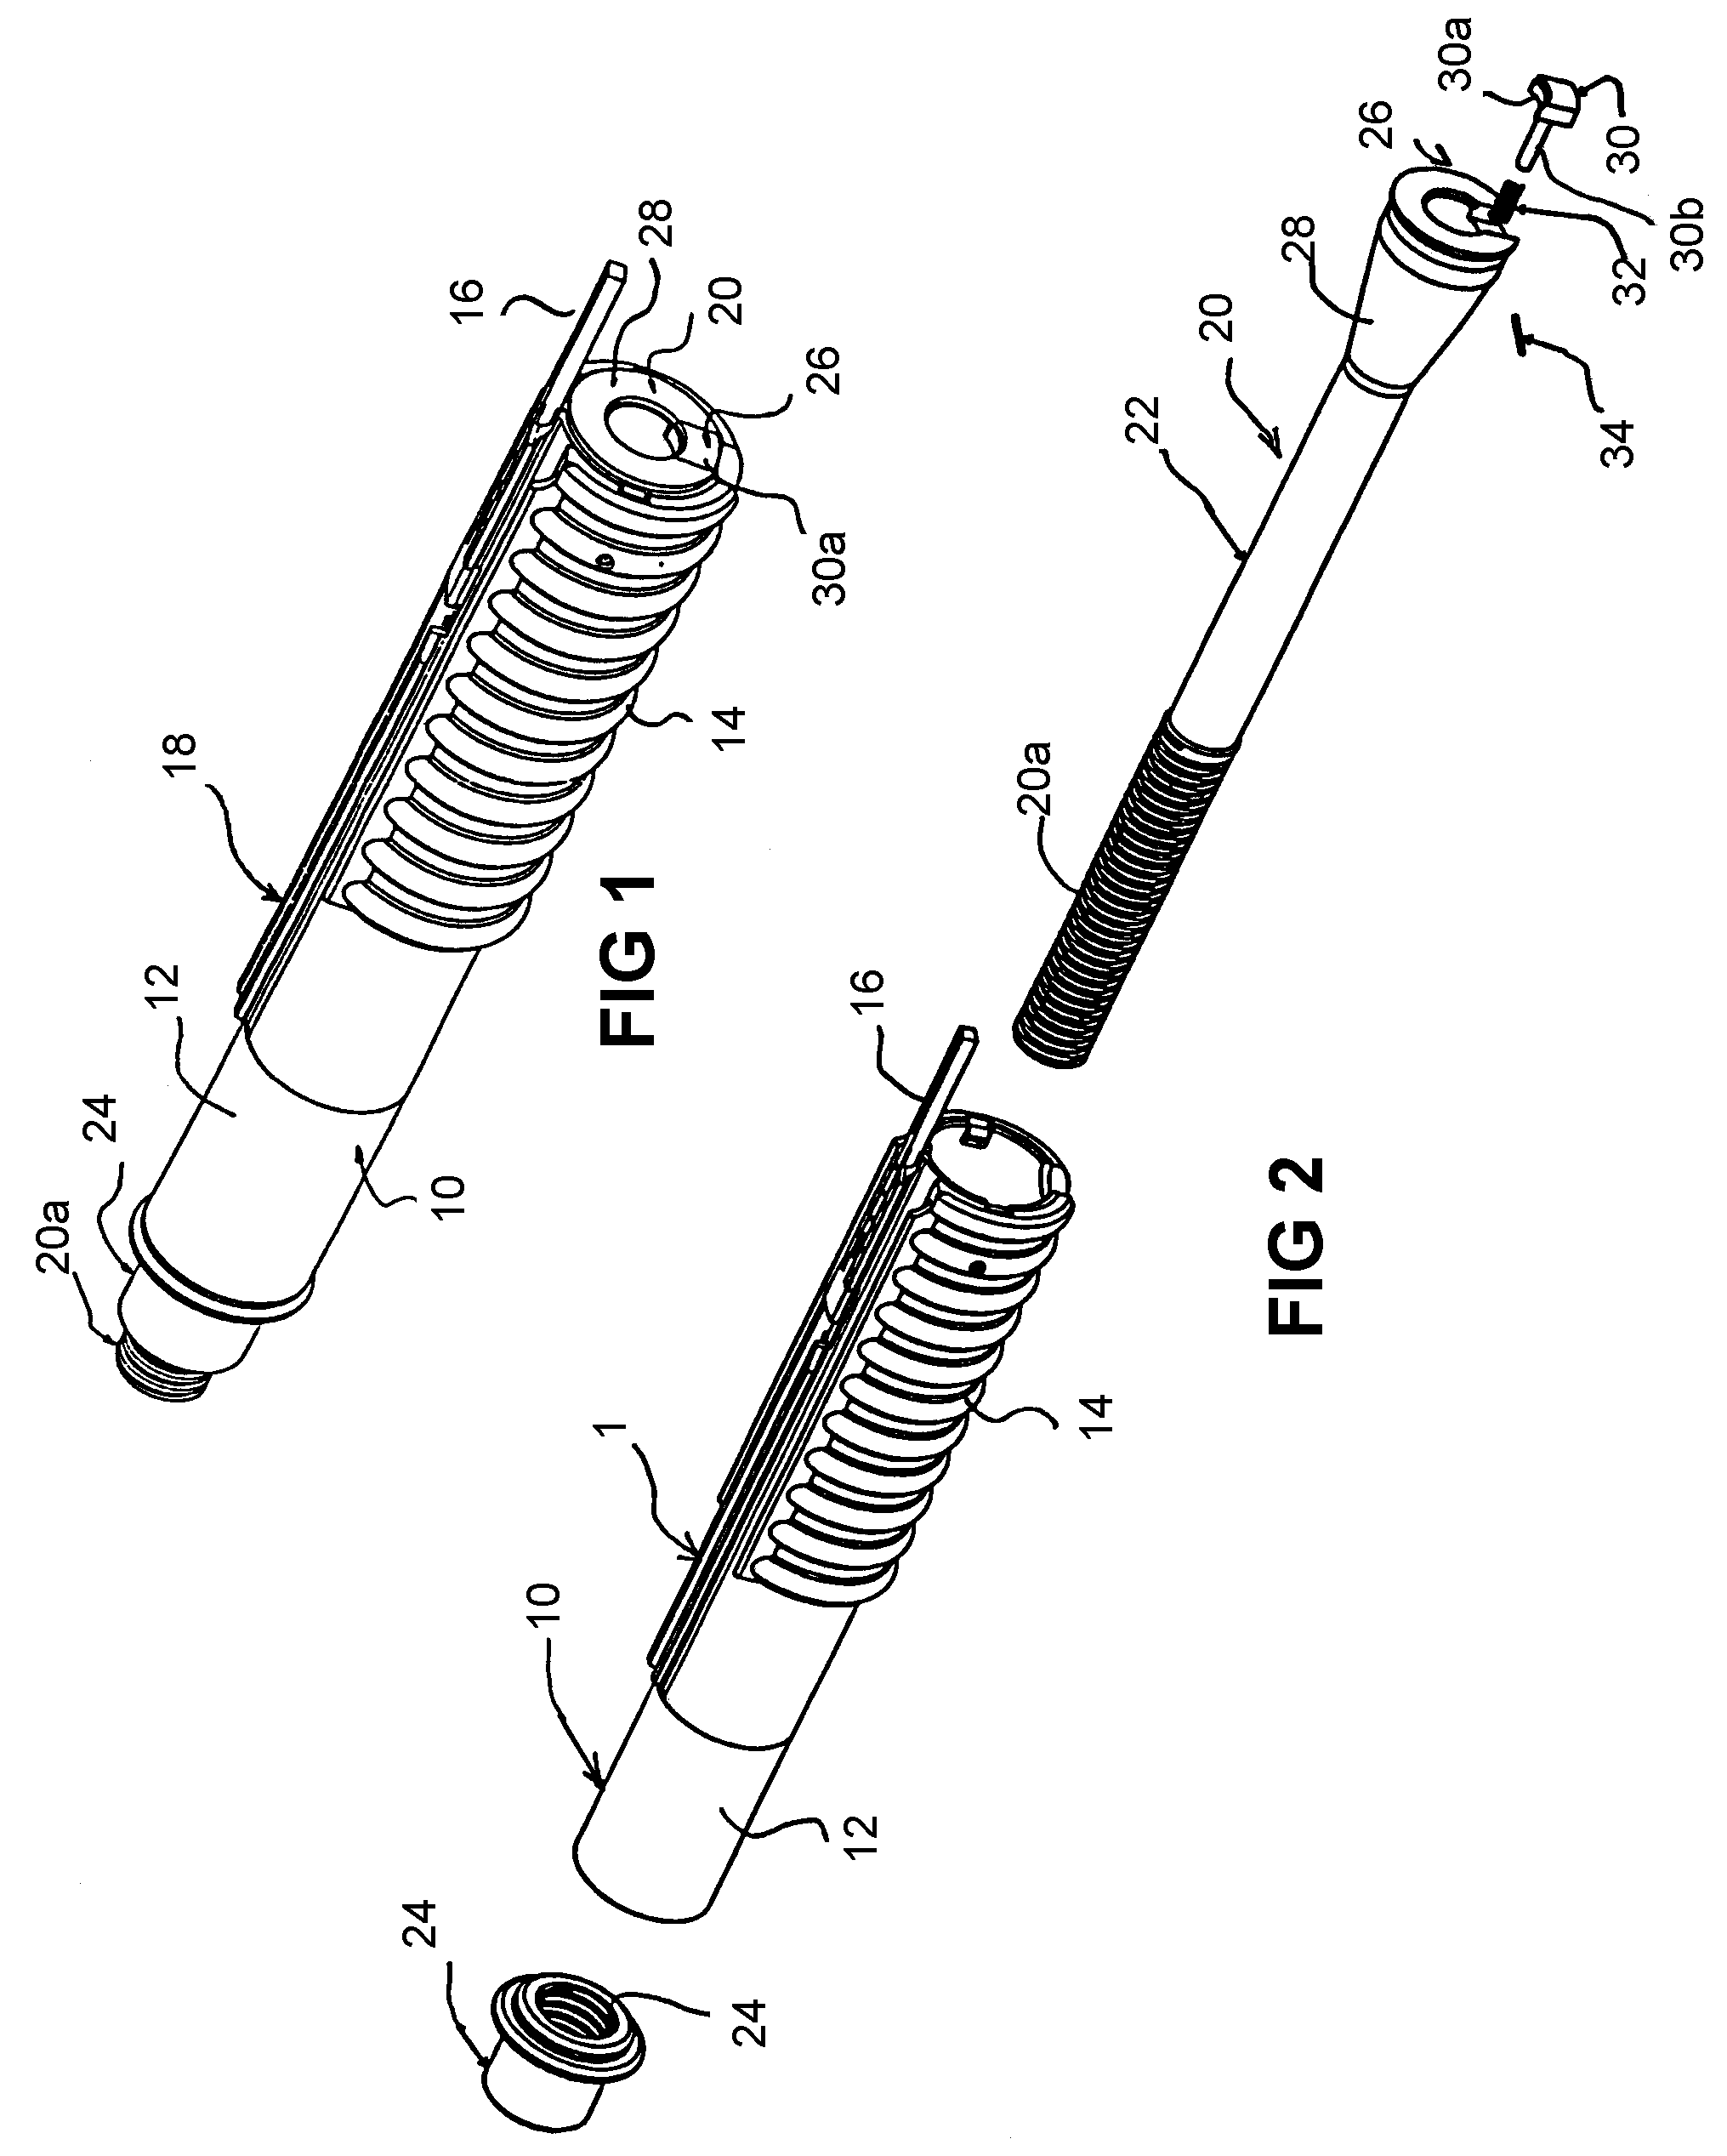 Barrel replacement or insert devices for firearm function conversion